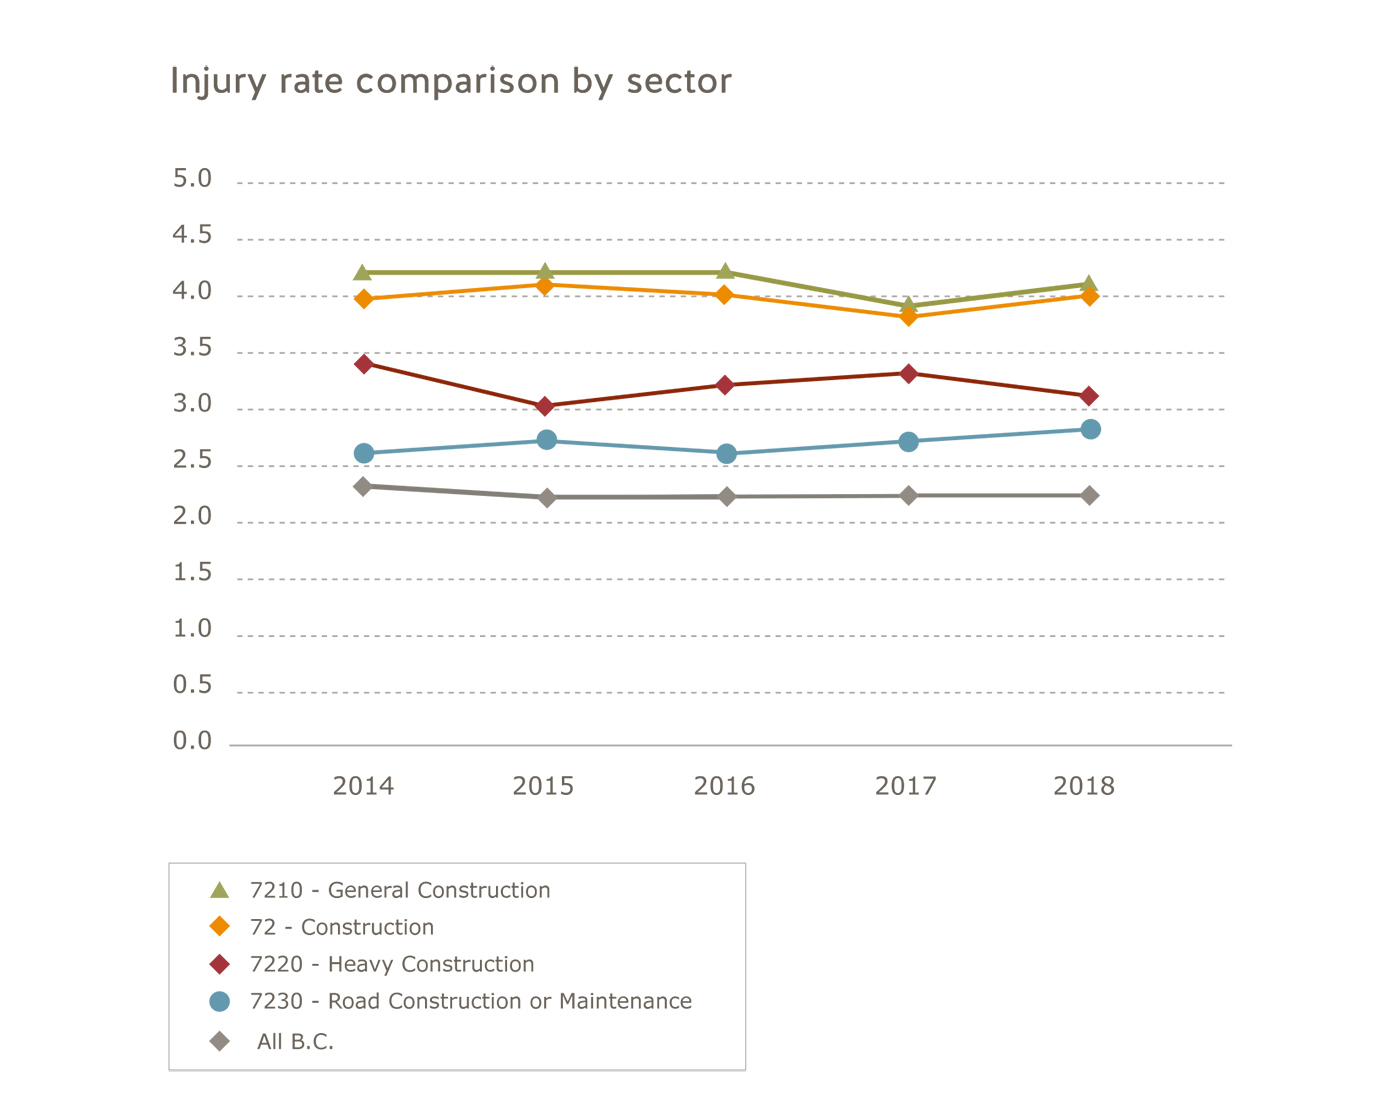 Injury rate comparison by sector for 2014 to 2018